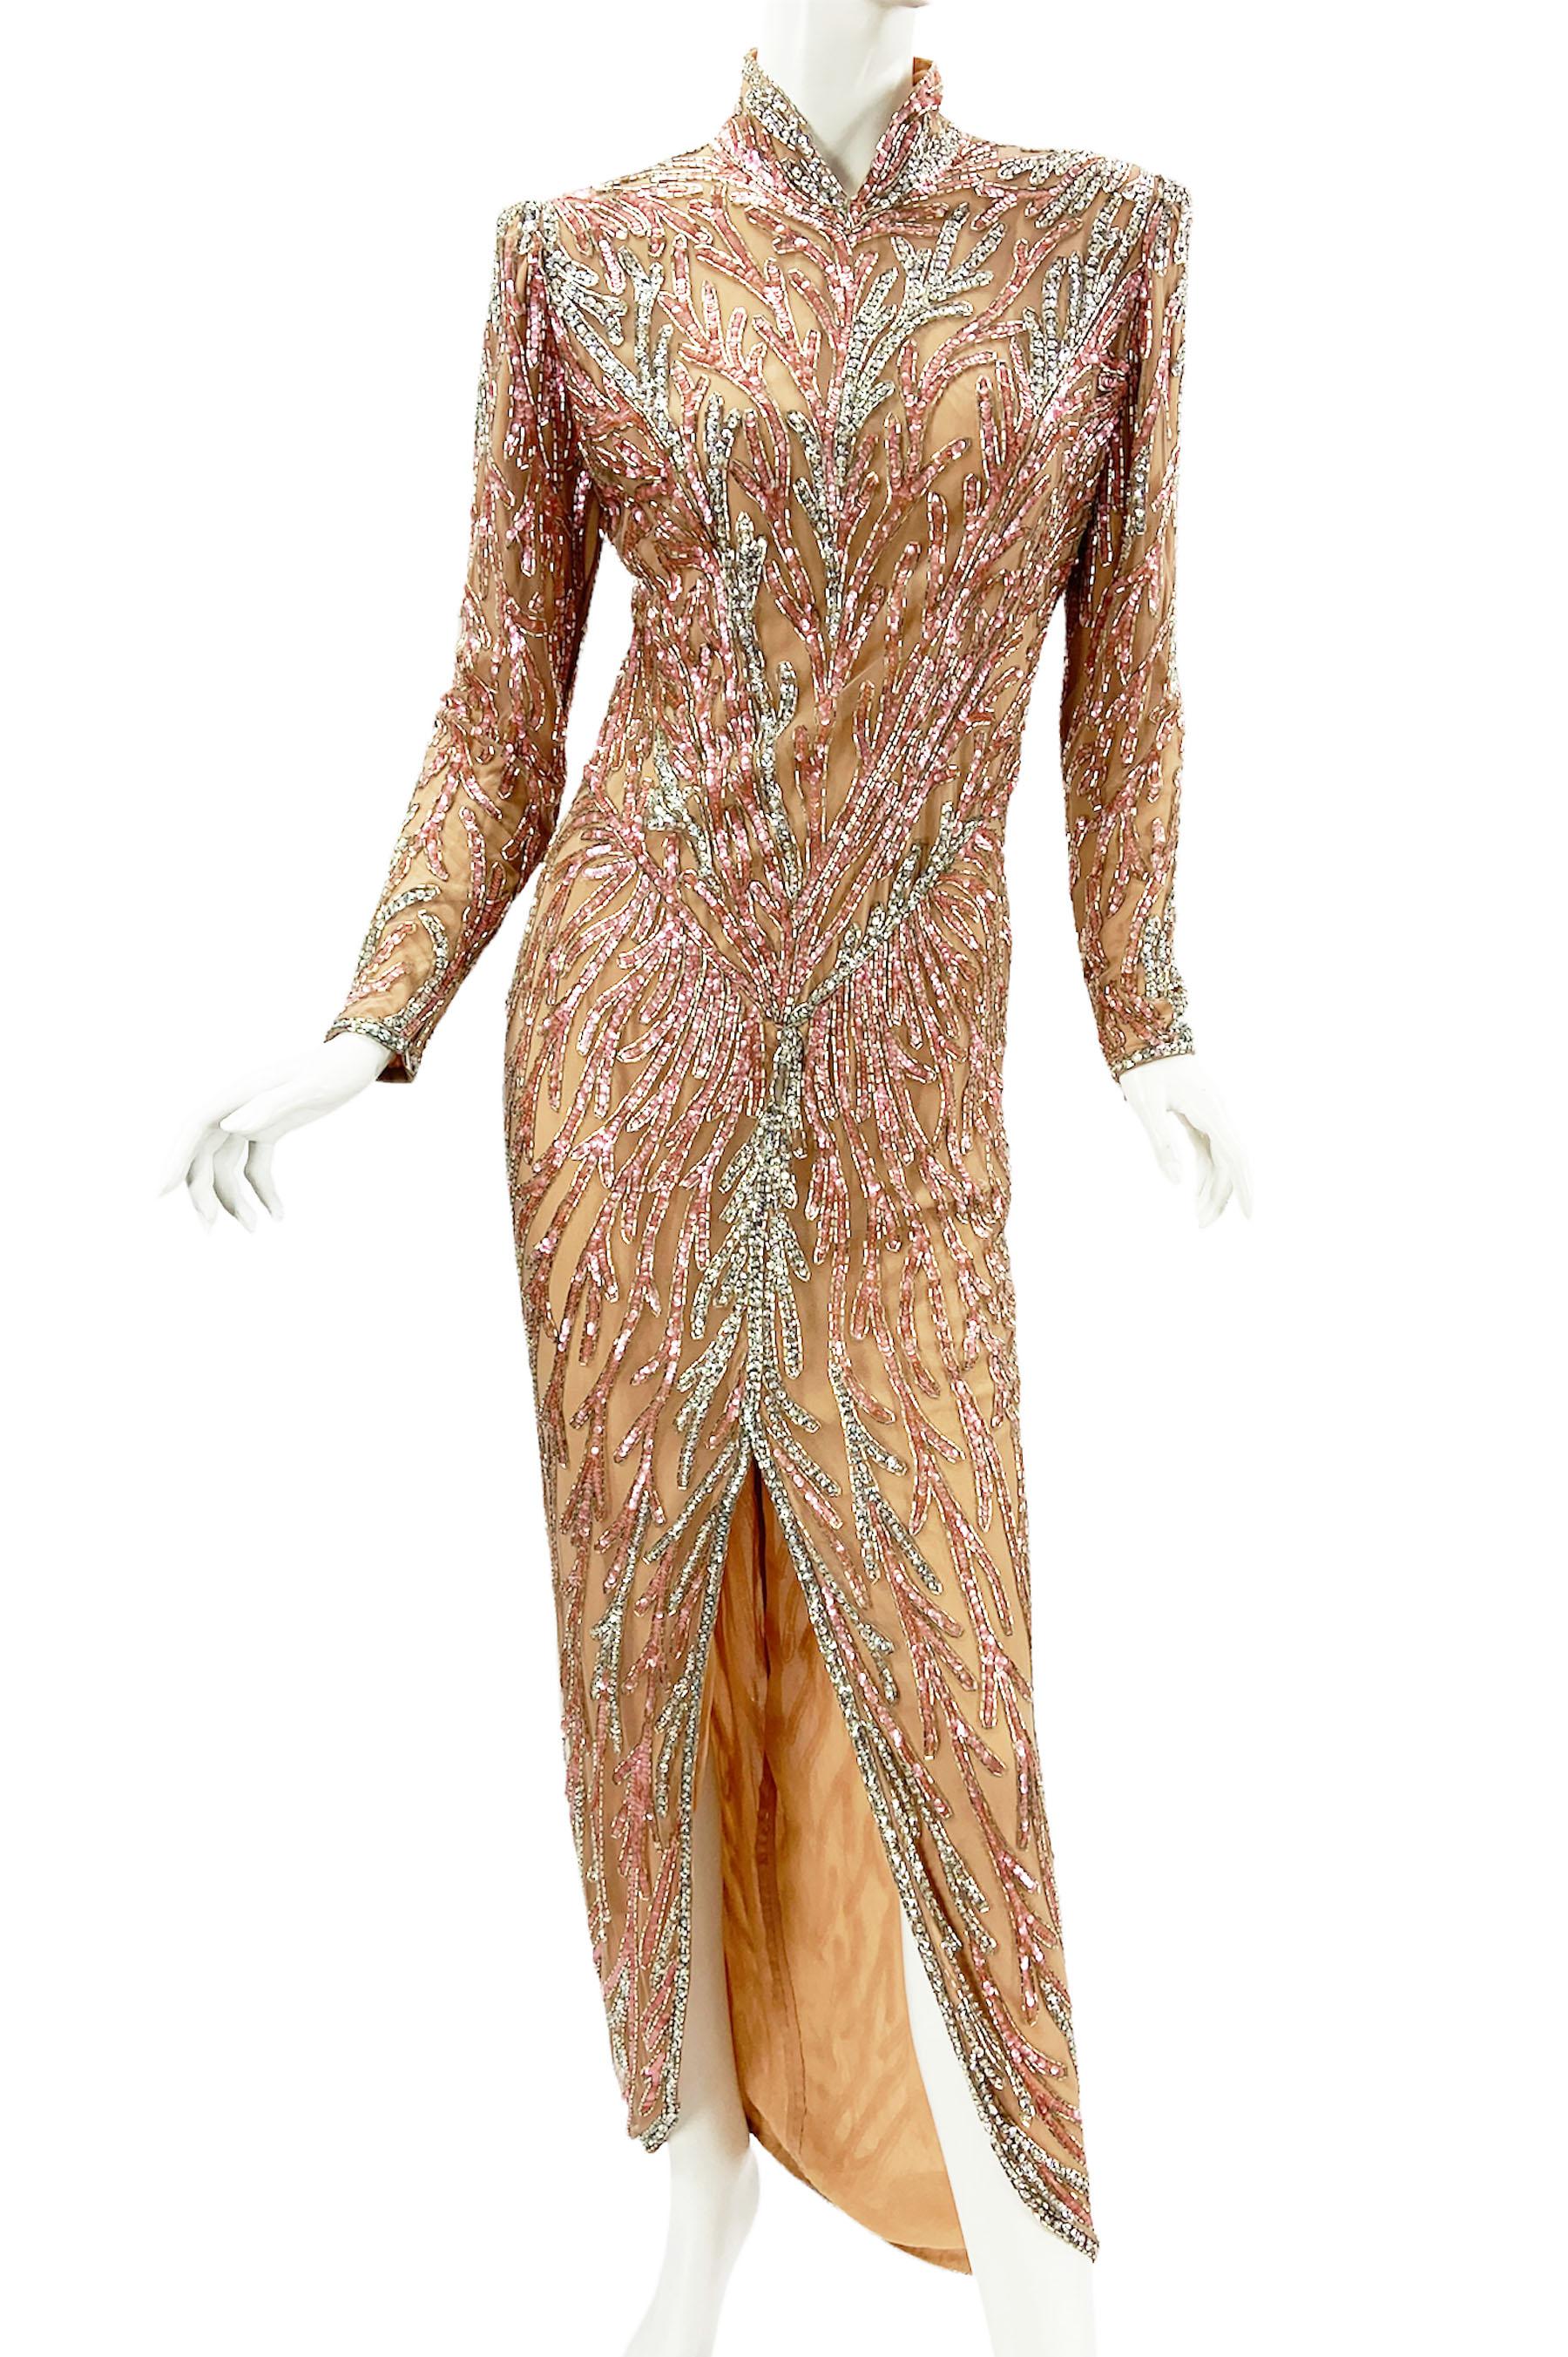 Vintage Bob Mackie Fully Embellished Long Dress Gown
The Strapless version of this dress was worn by Goldie Hawn at 66th Academy awards in 1989.
Designer size 12 ( modern size will be smaller - pls. check measurements).
Hand Beaded, 100% Silk, Pink